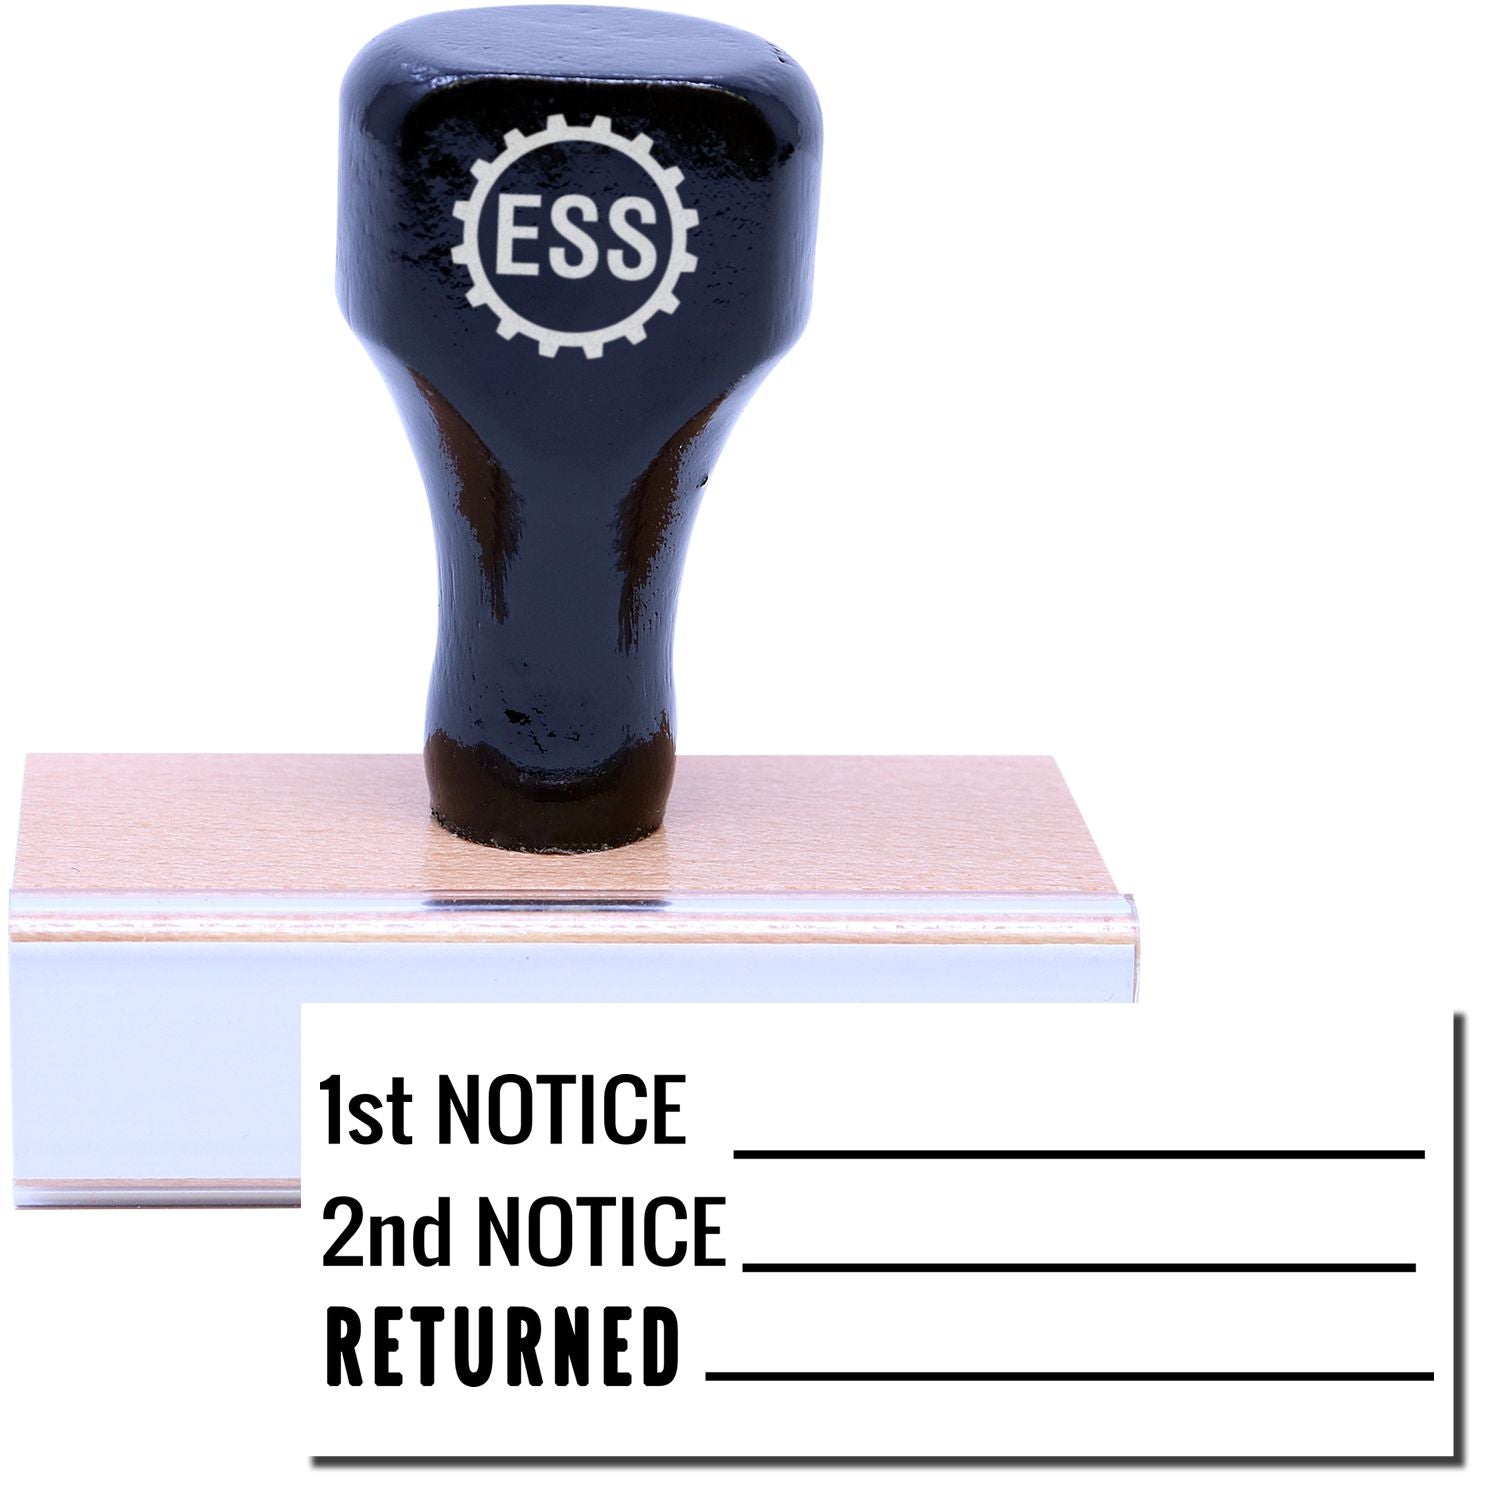 A stock office rubber stamp with a stamped image showing how the texts "1st NOTICE", "2nd NOTICE", and "RETURNED" with a line after each one of them are displayed after stamping.